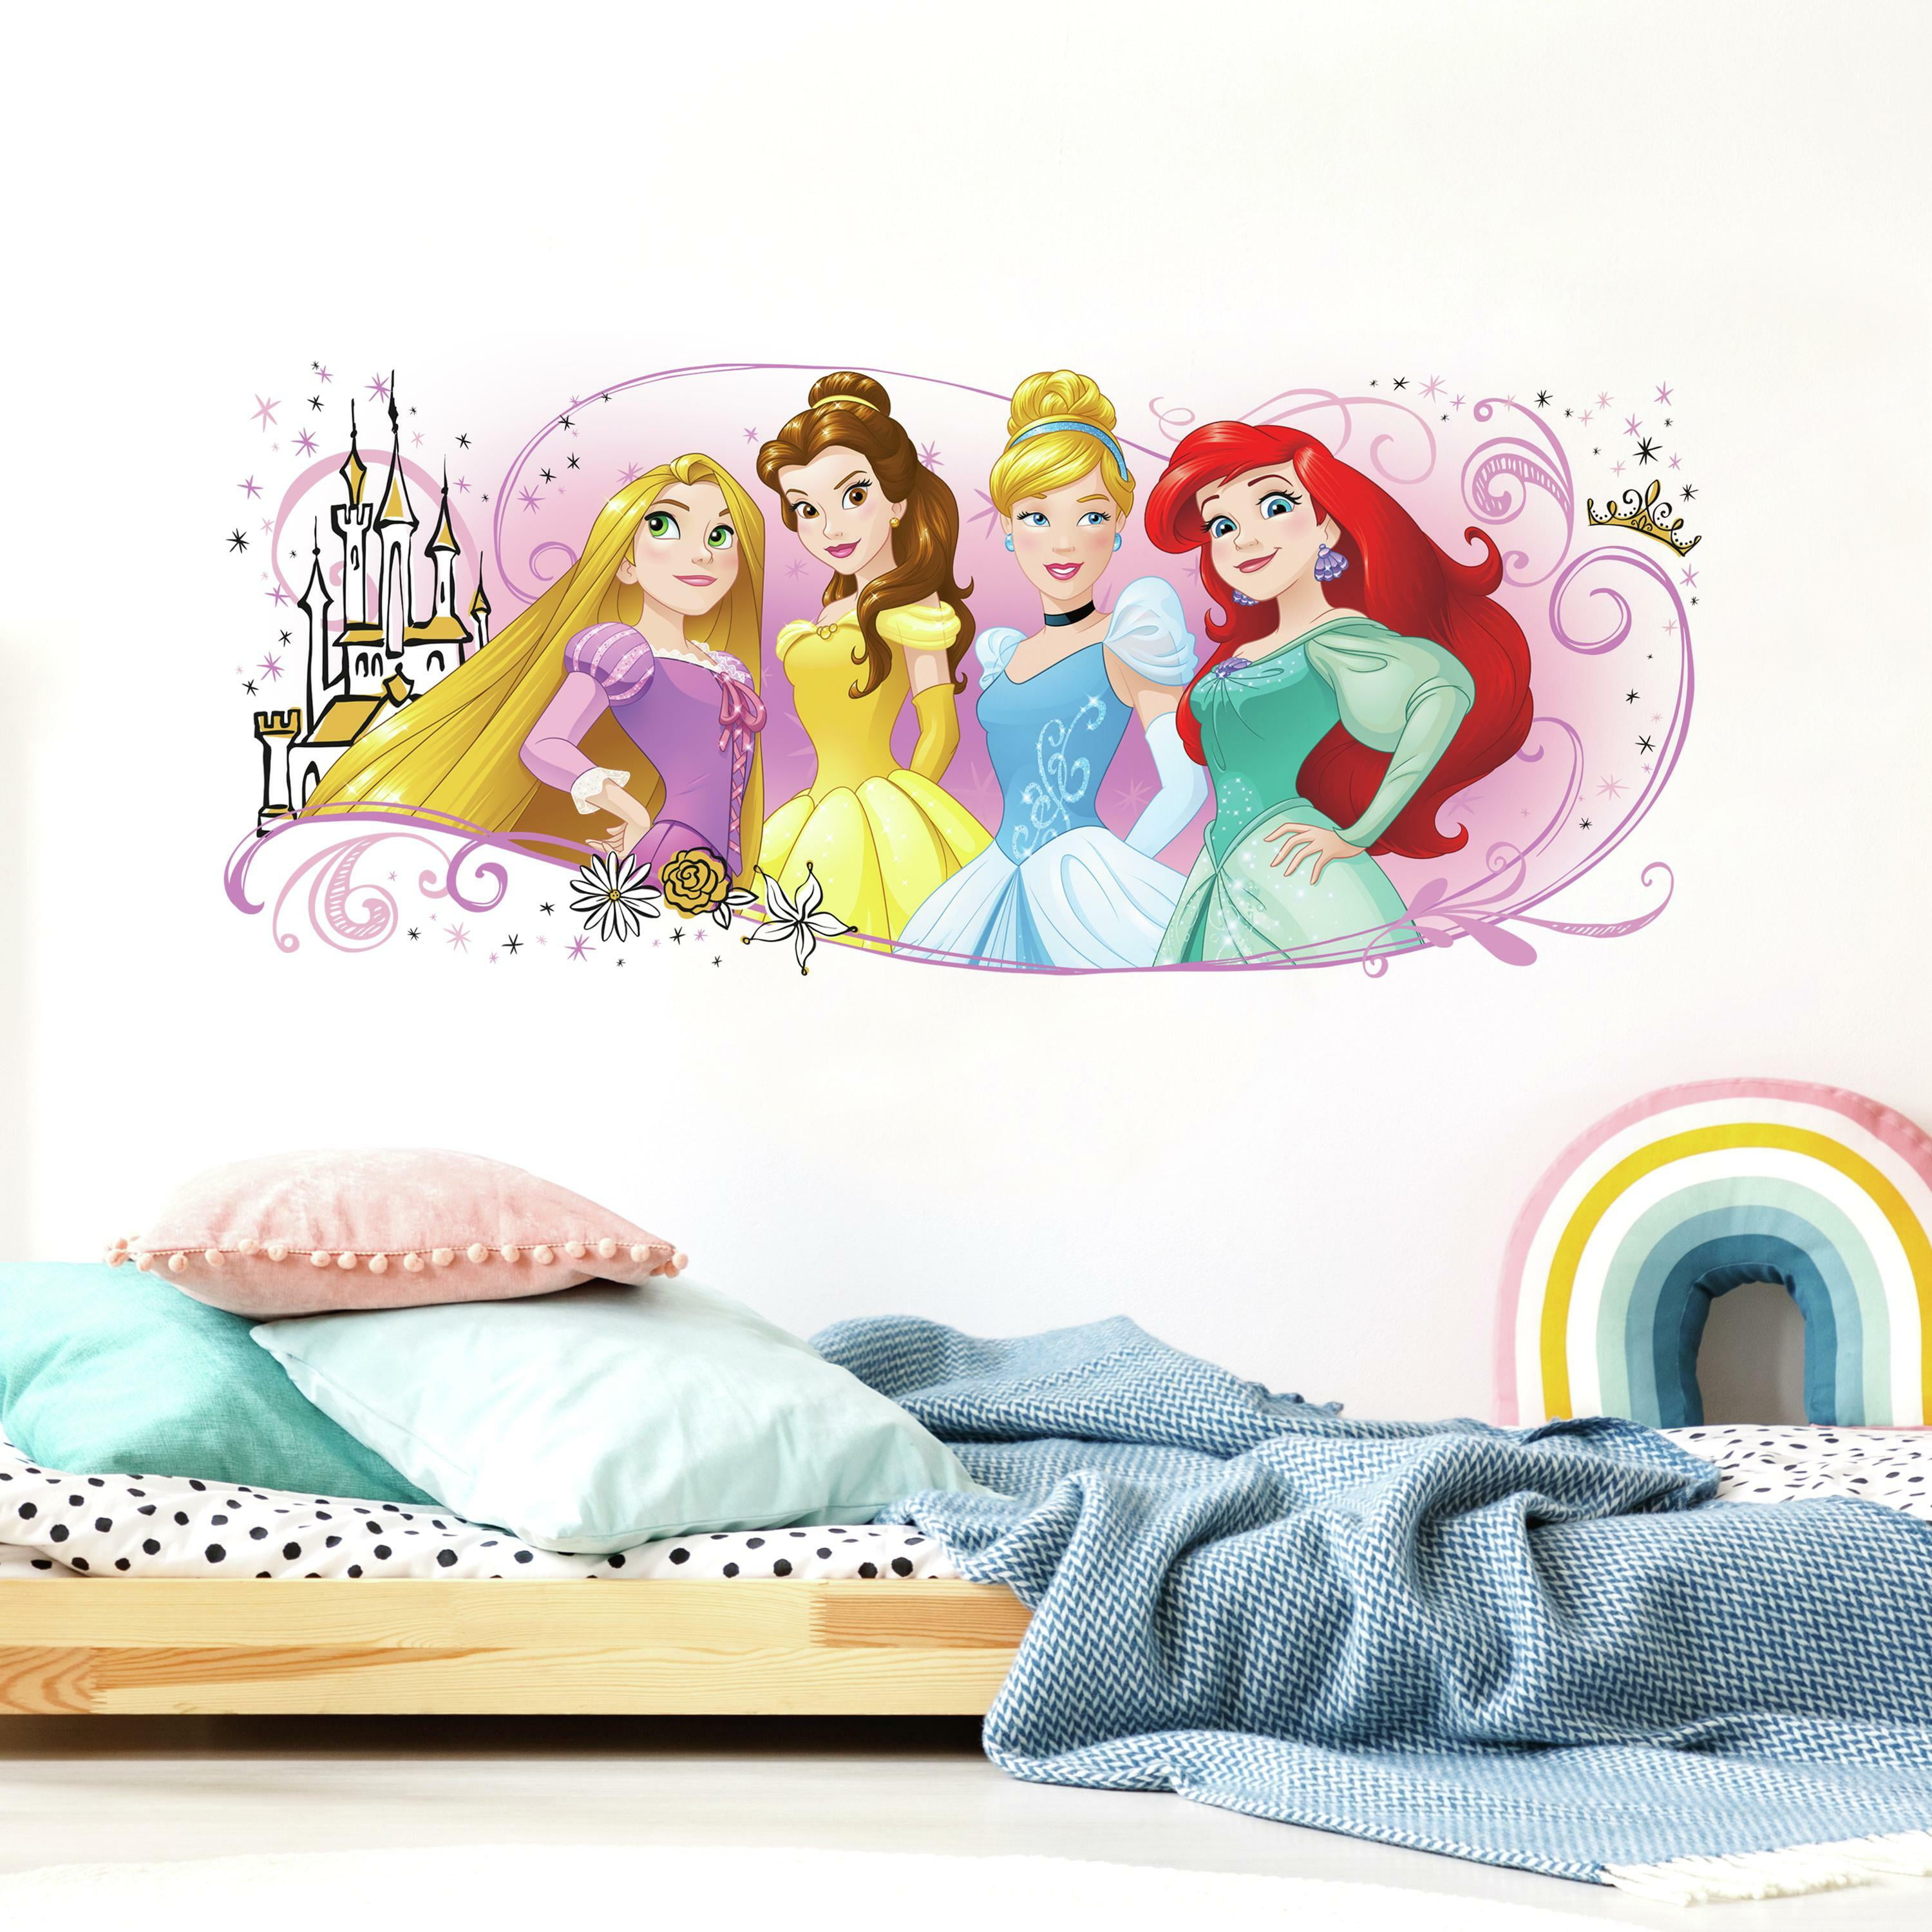 Girly bedroom decor photo wallpaper feature wall Disney PrincessWithout glue